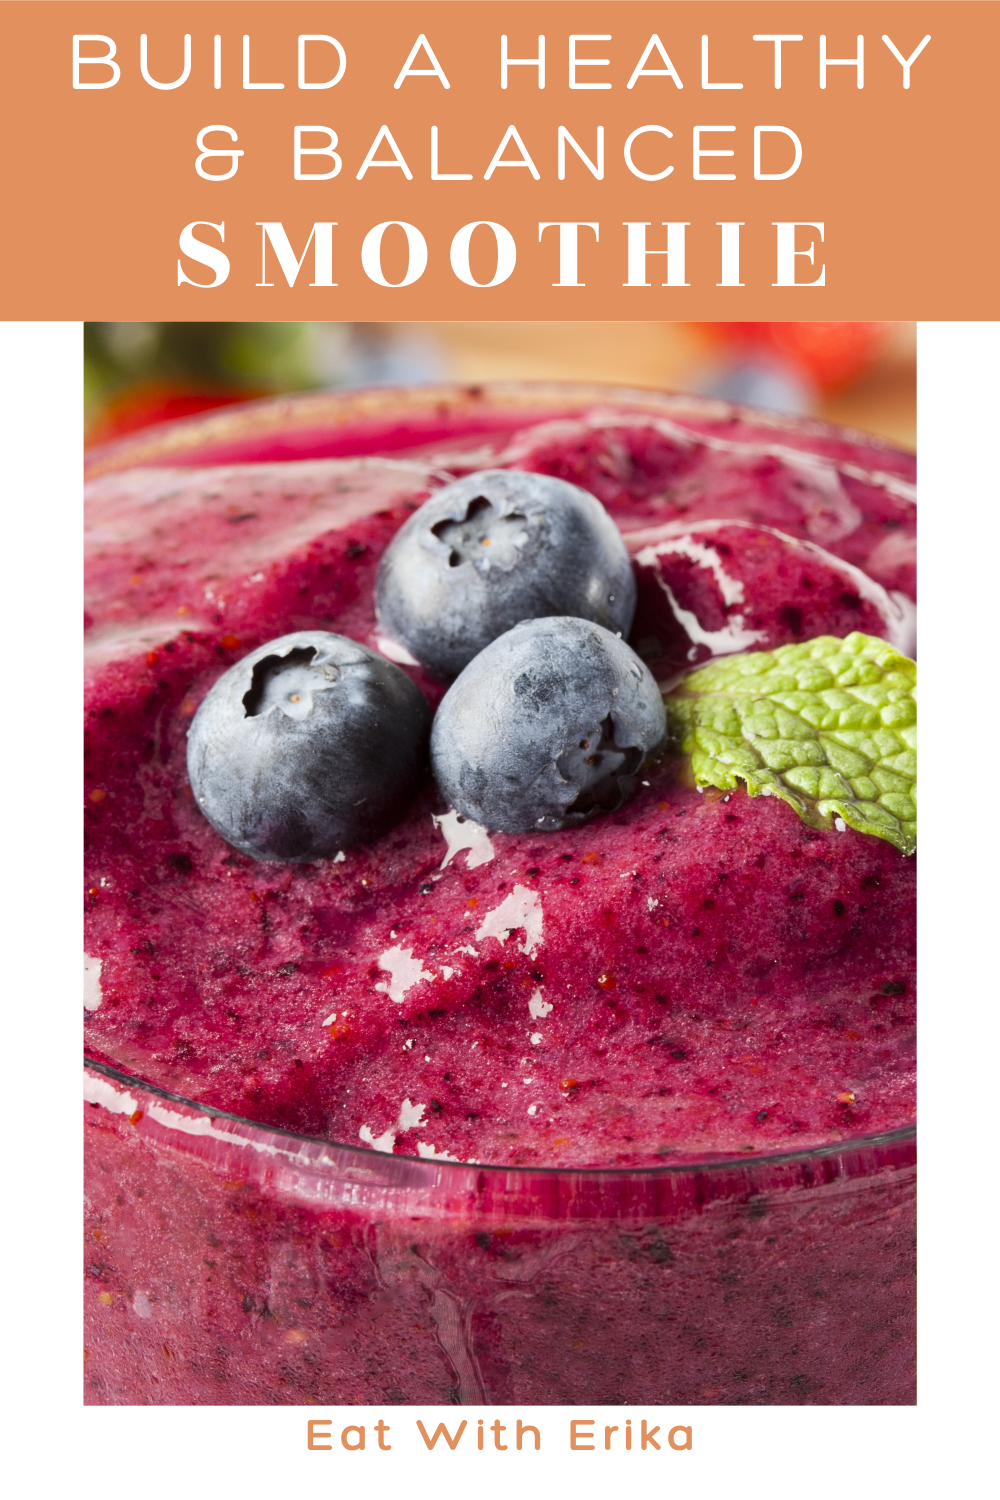 mixed berry smoothie with blueberries and mint, build a healthy and balanced smoothie